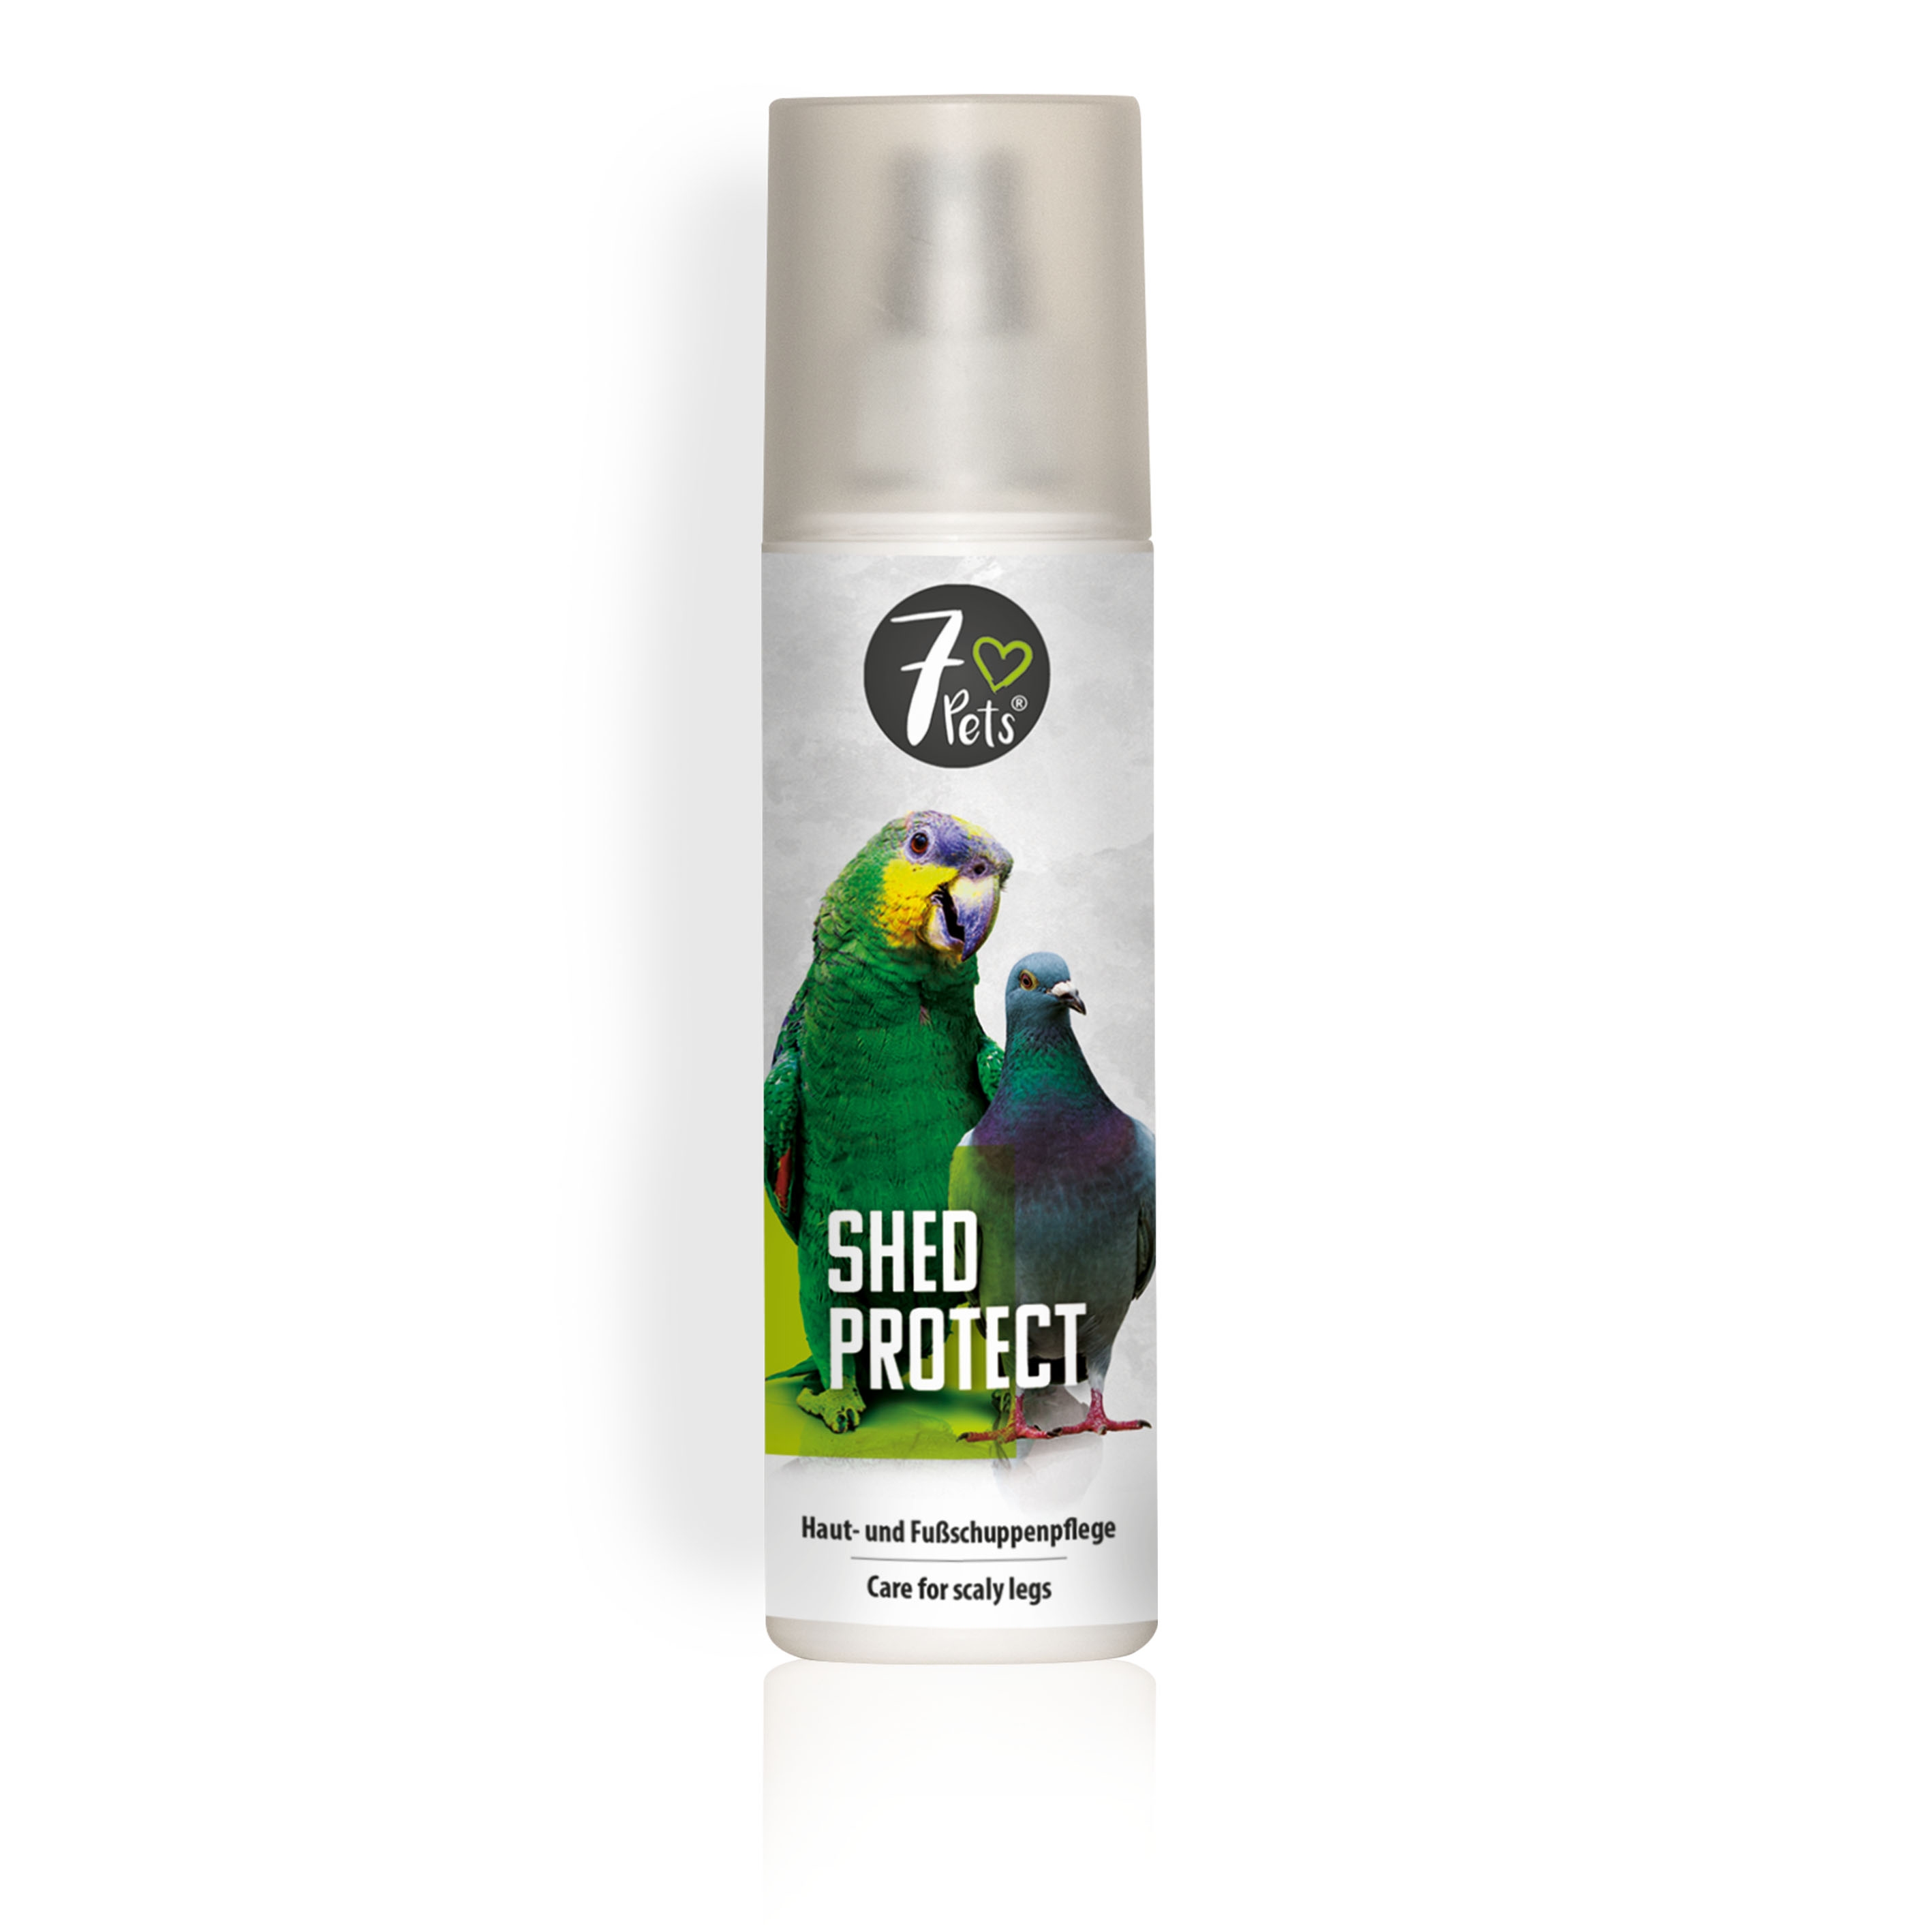 Shed Protect, 200 ml 7Pets